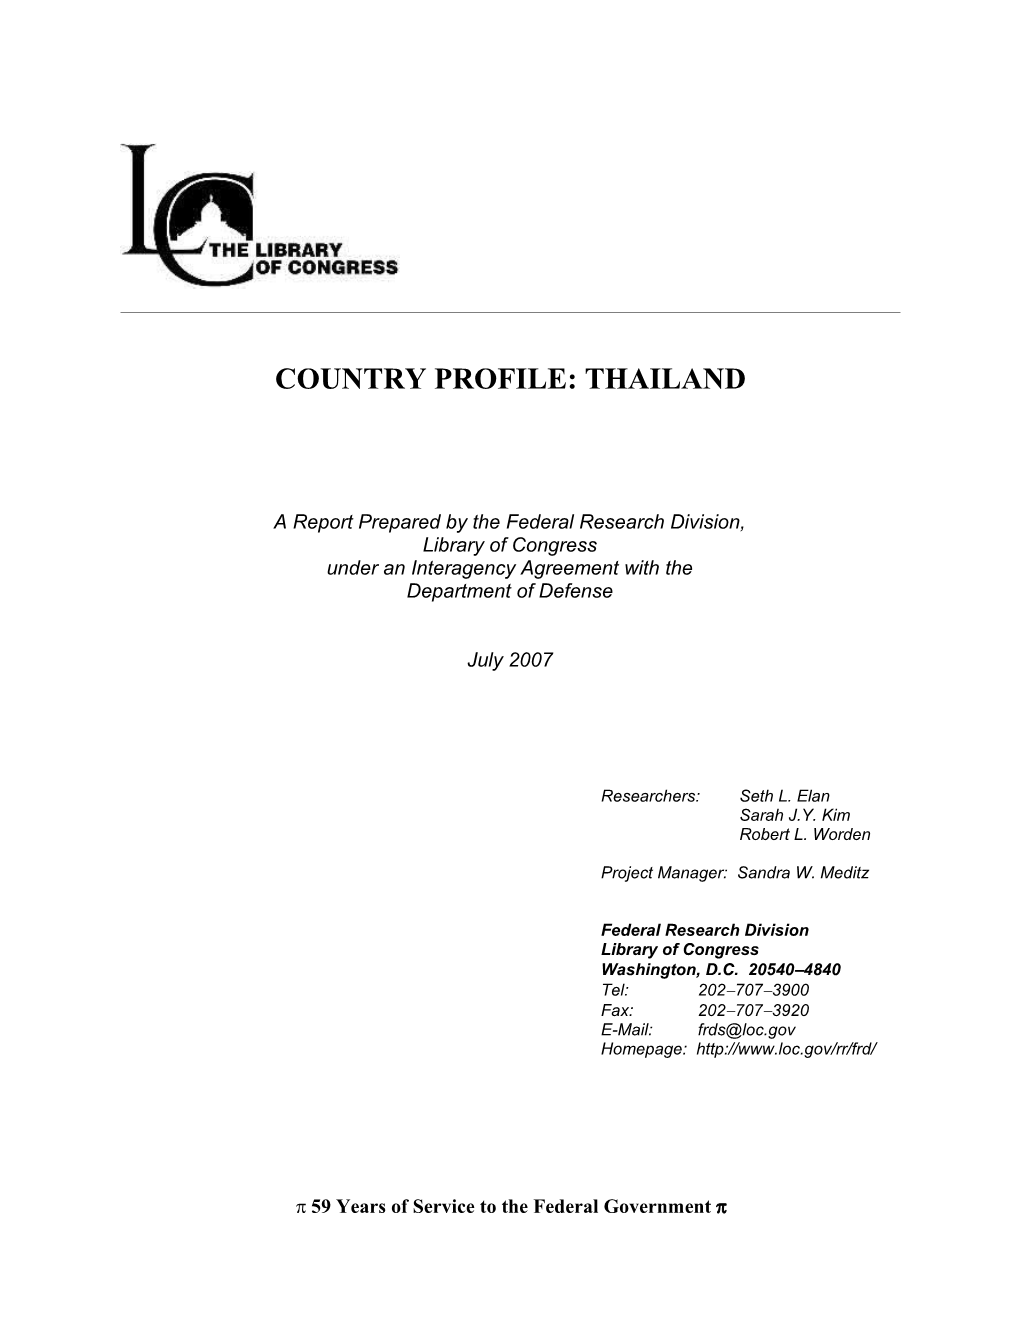 Country Profile: Thailand